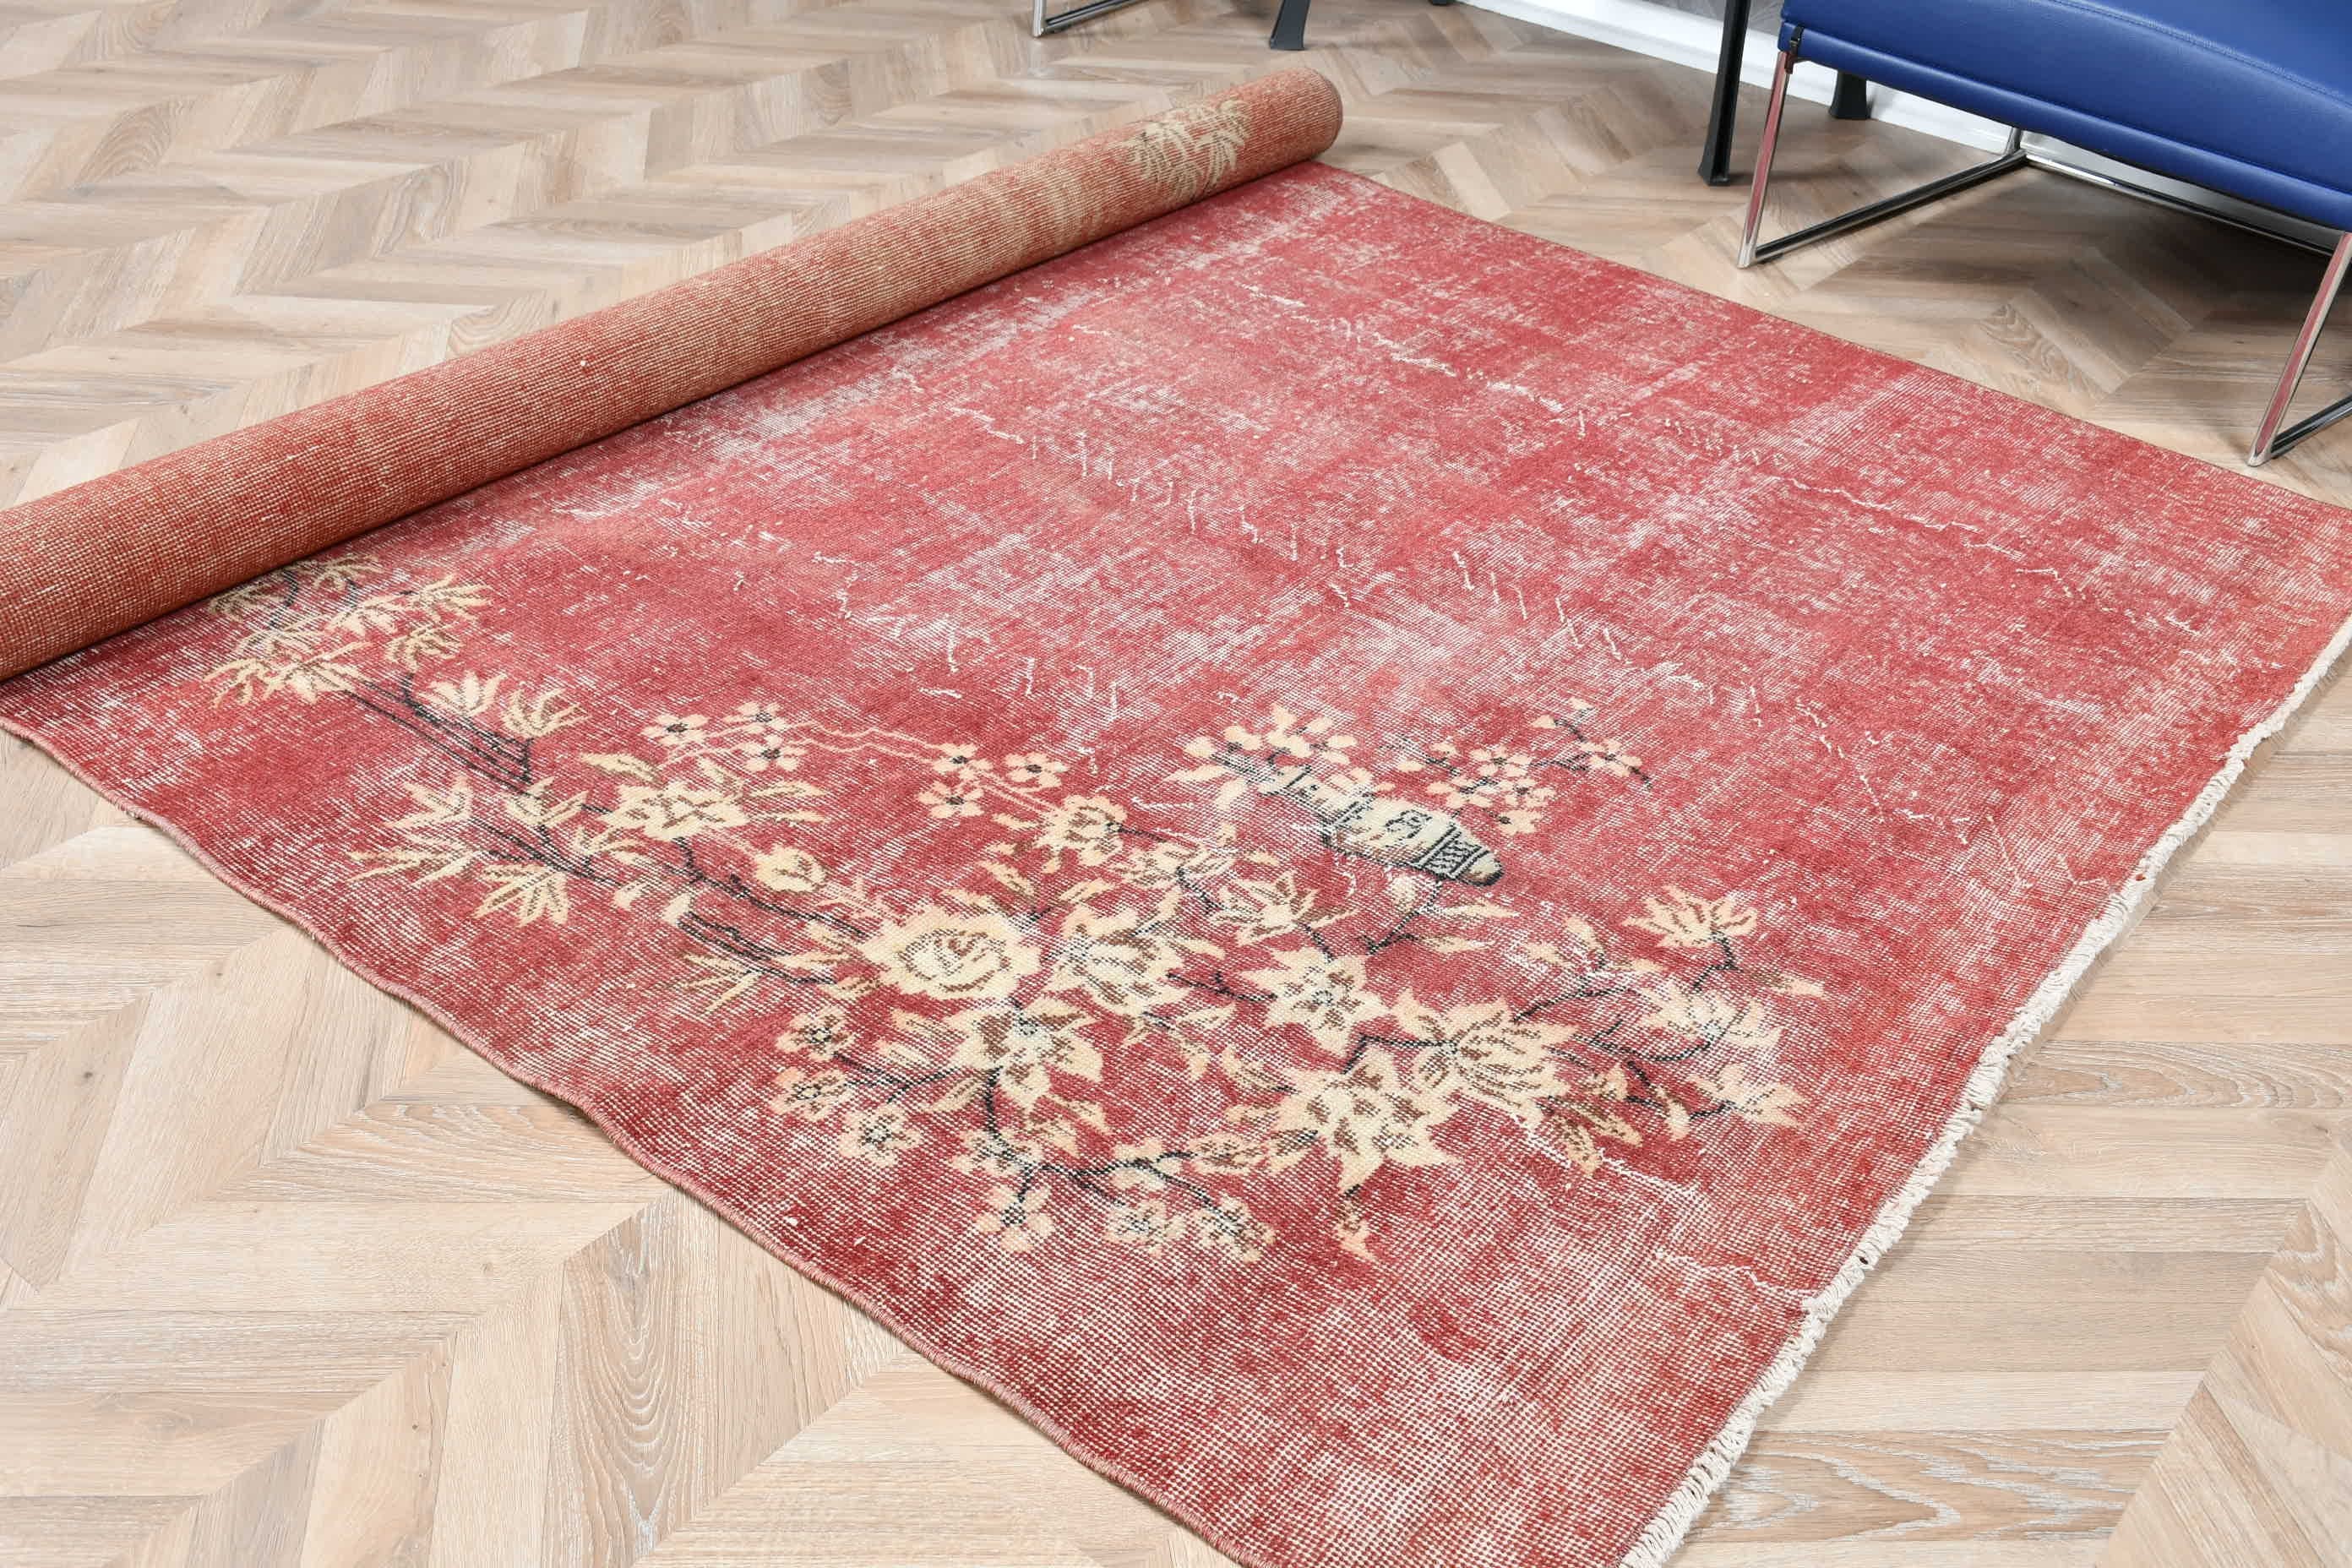 Vintage Rug, Cool Rug, Dining Room Rugs, Rugs for Dining Room, 5.9x9.4 ft Large Rugs, Turkish Rugs, Anatolian Rugs, Red Bedroom Rugs